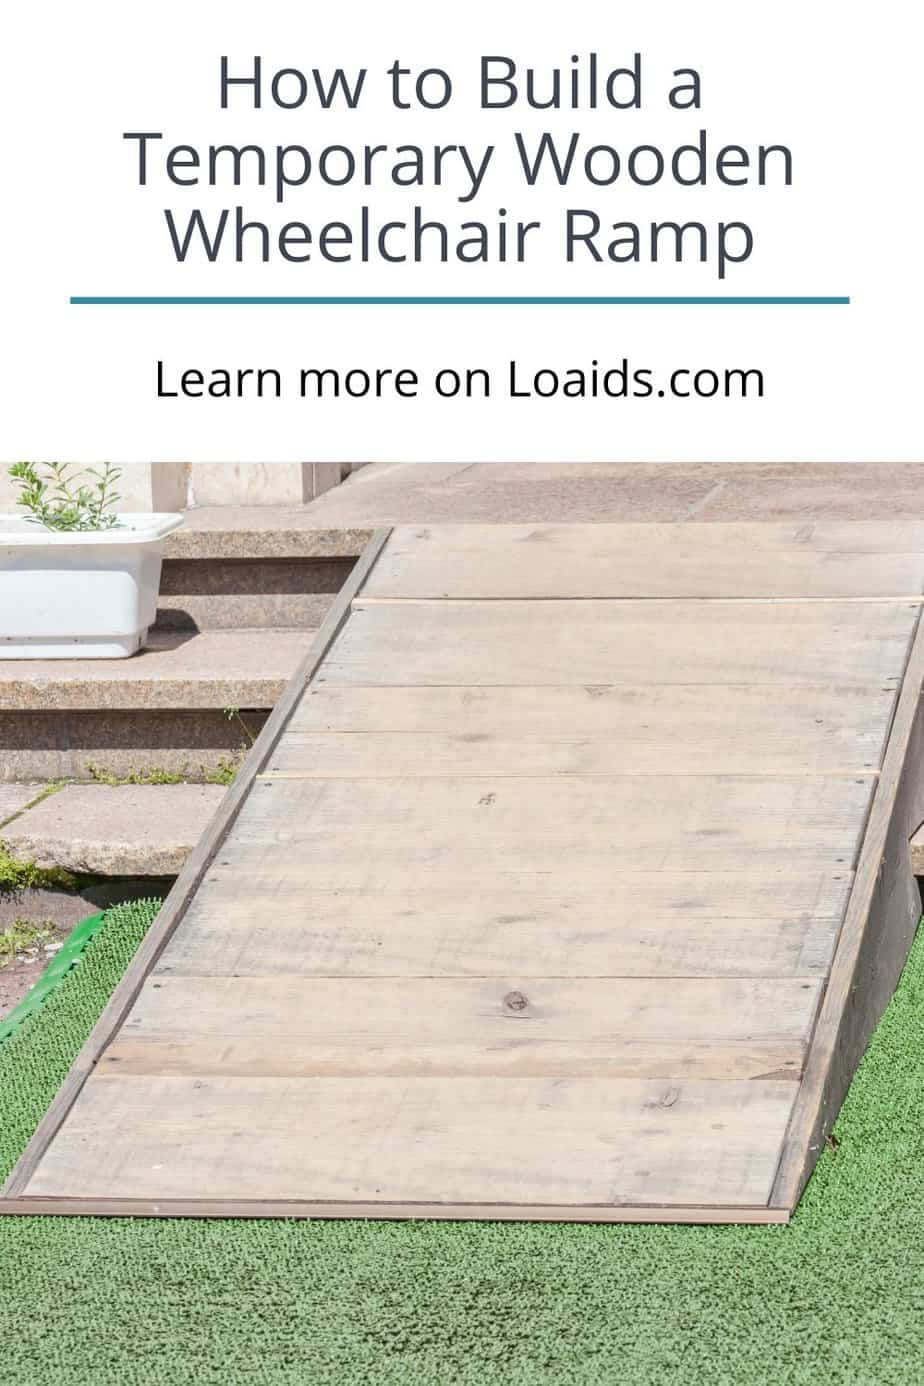 How to Build a Temporary Wooden Wheelchair Ramp